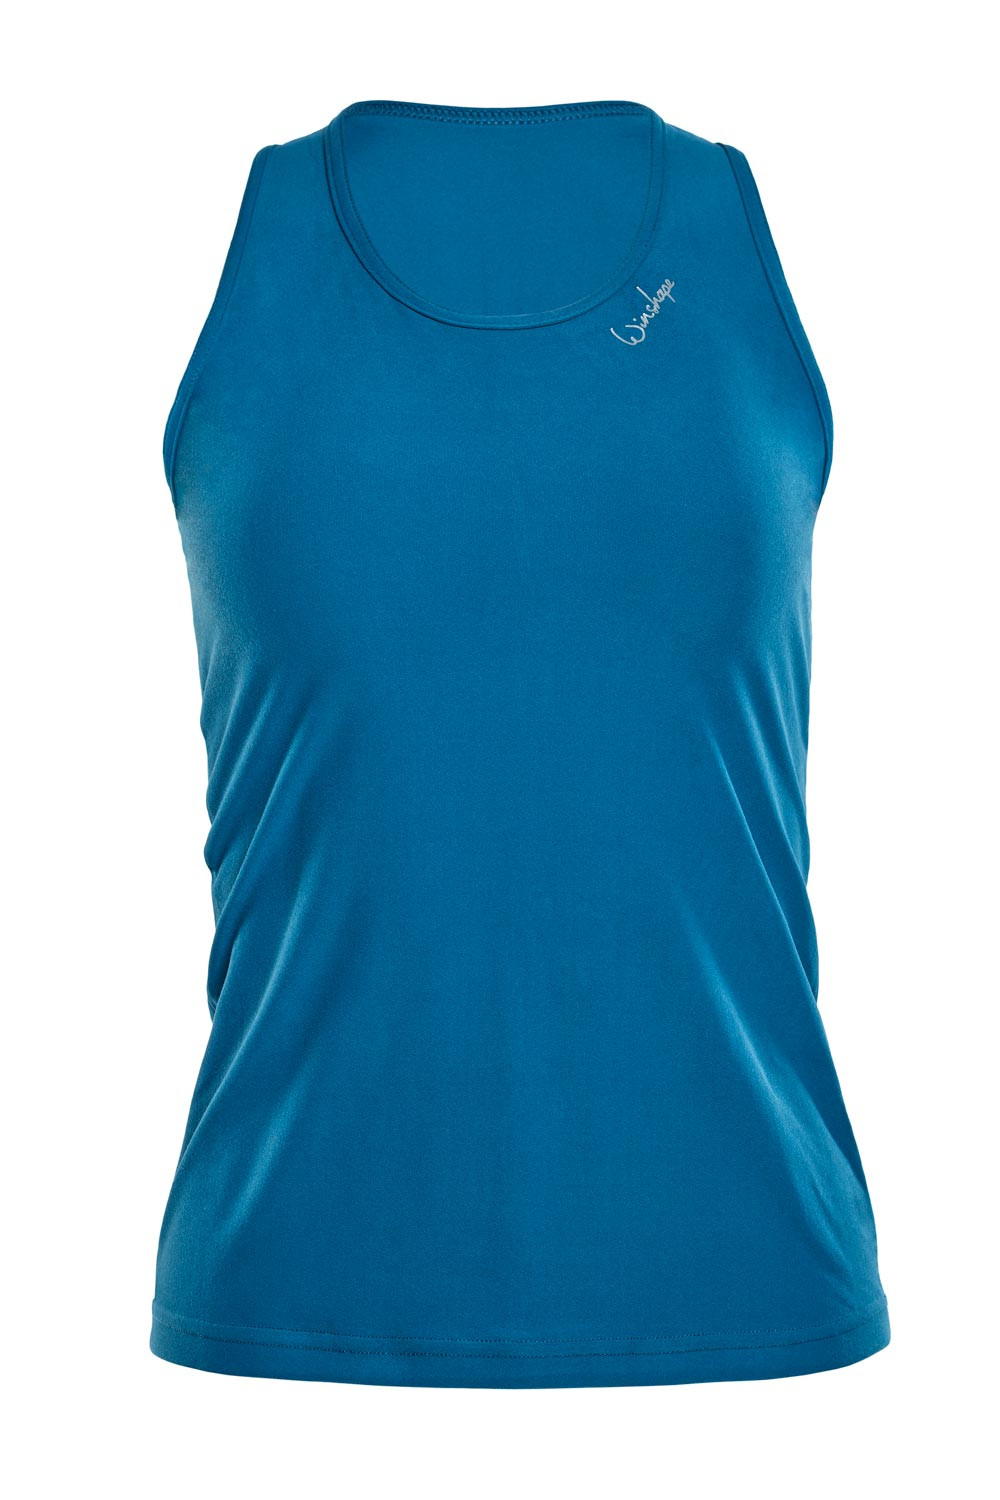 Soft AET124LS, and Soft teal Functional Ultra Style Light Tanktop Winshape green,